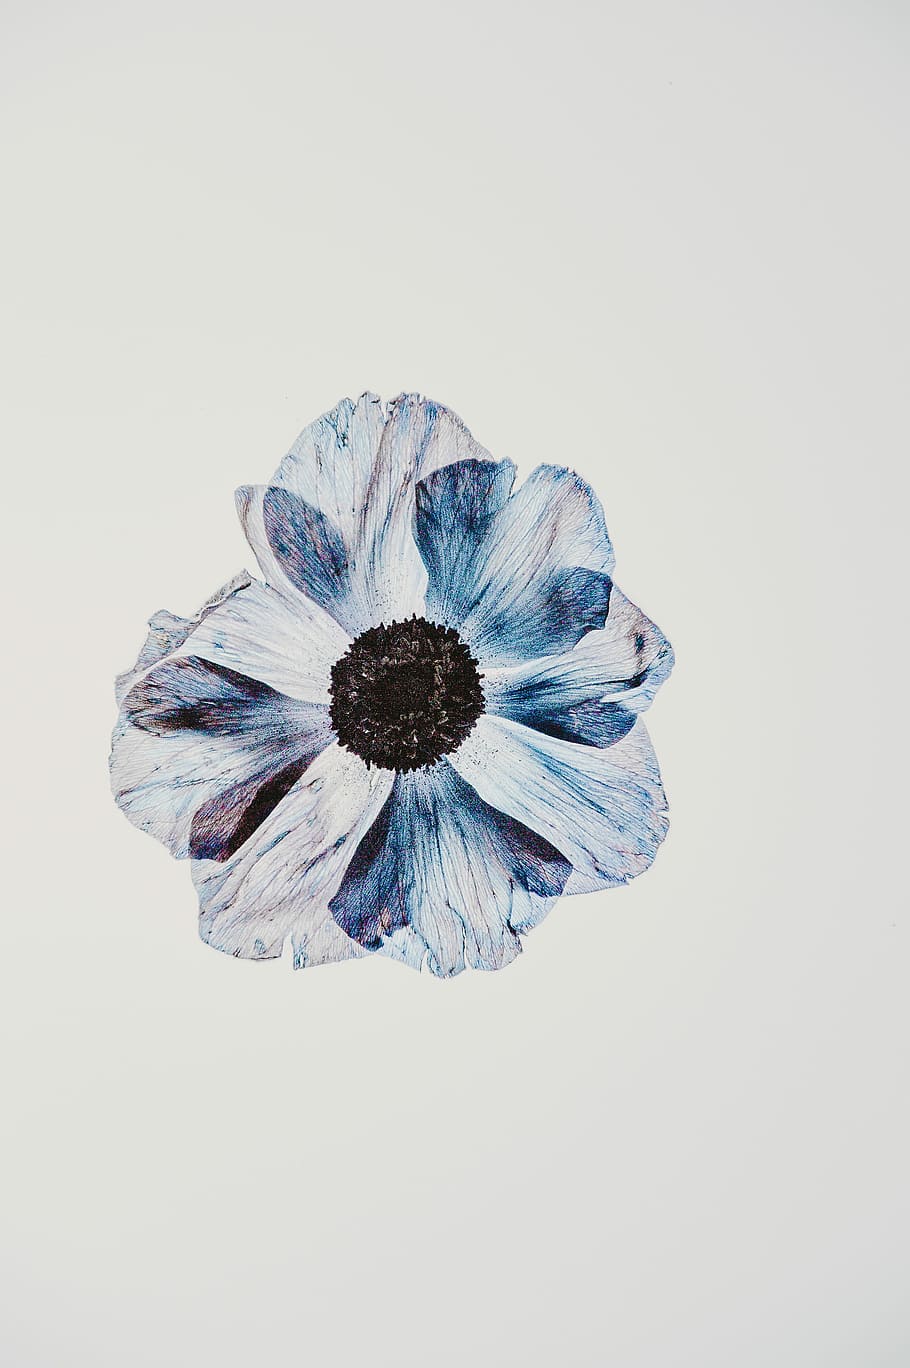 Hd Wallpaper Anemone On Lightbox Whitey And Blue Petaled Flower Painting Wallpaper Flare